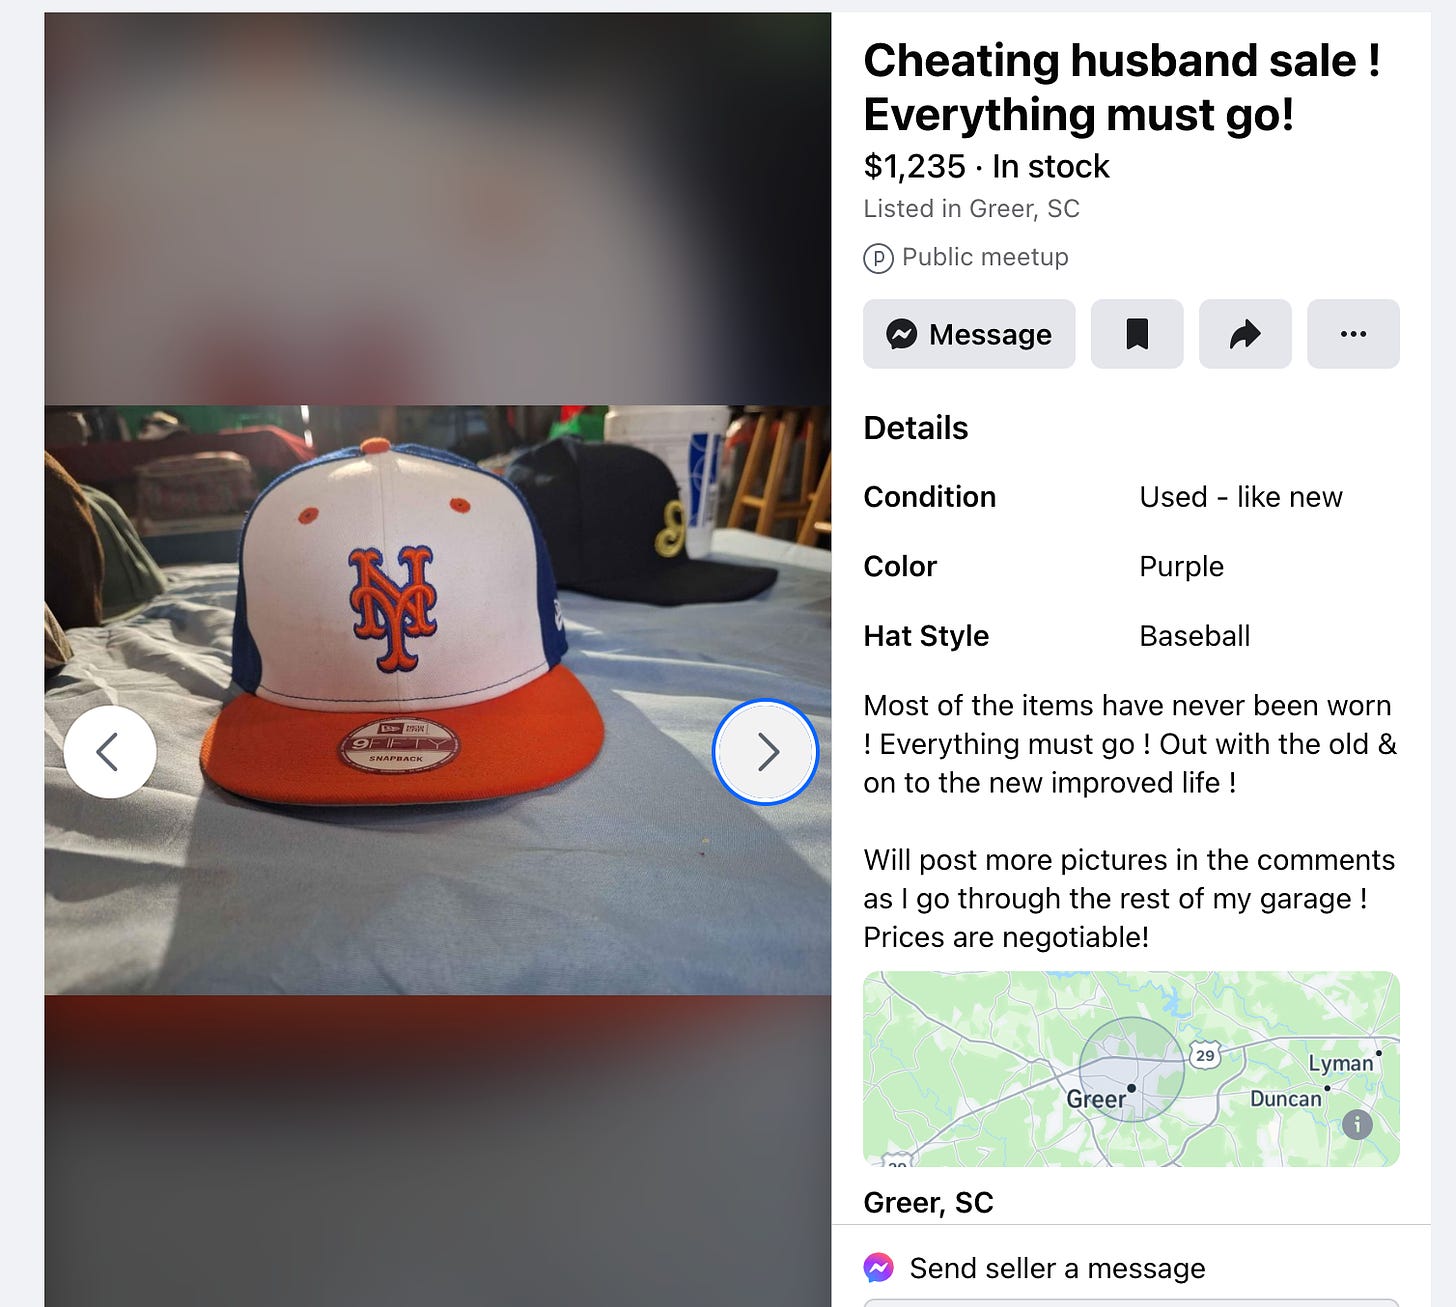 facebook marketplace listing titled "cheating husband sale! everything must go". photo of a mets hat